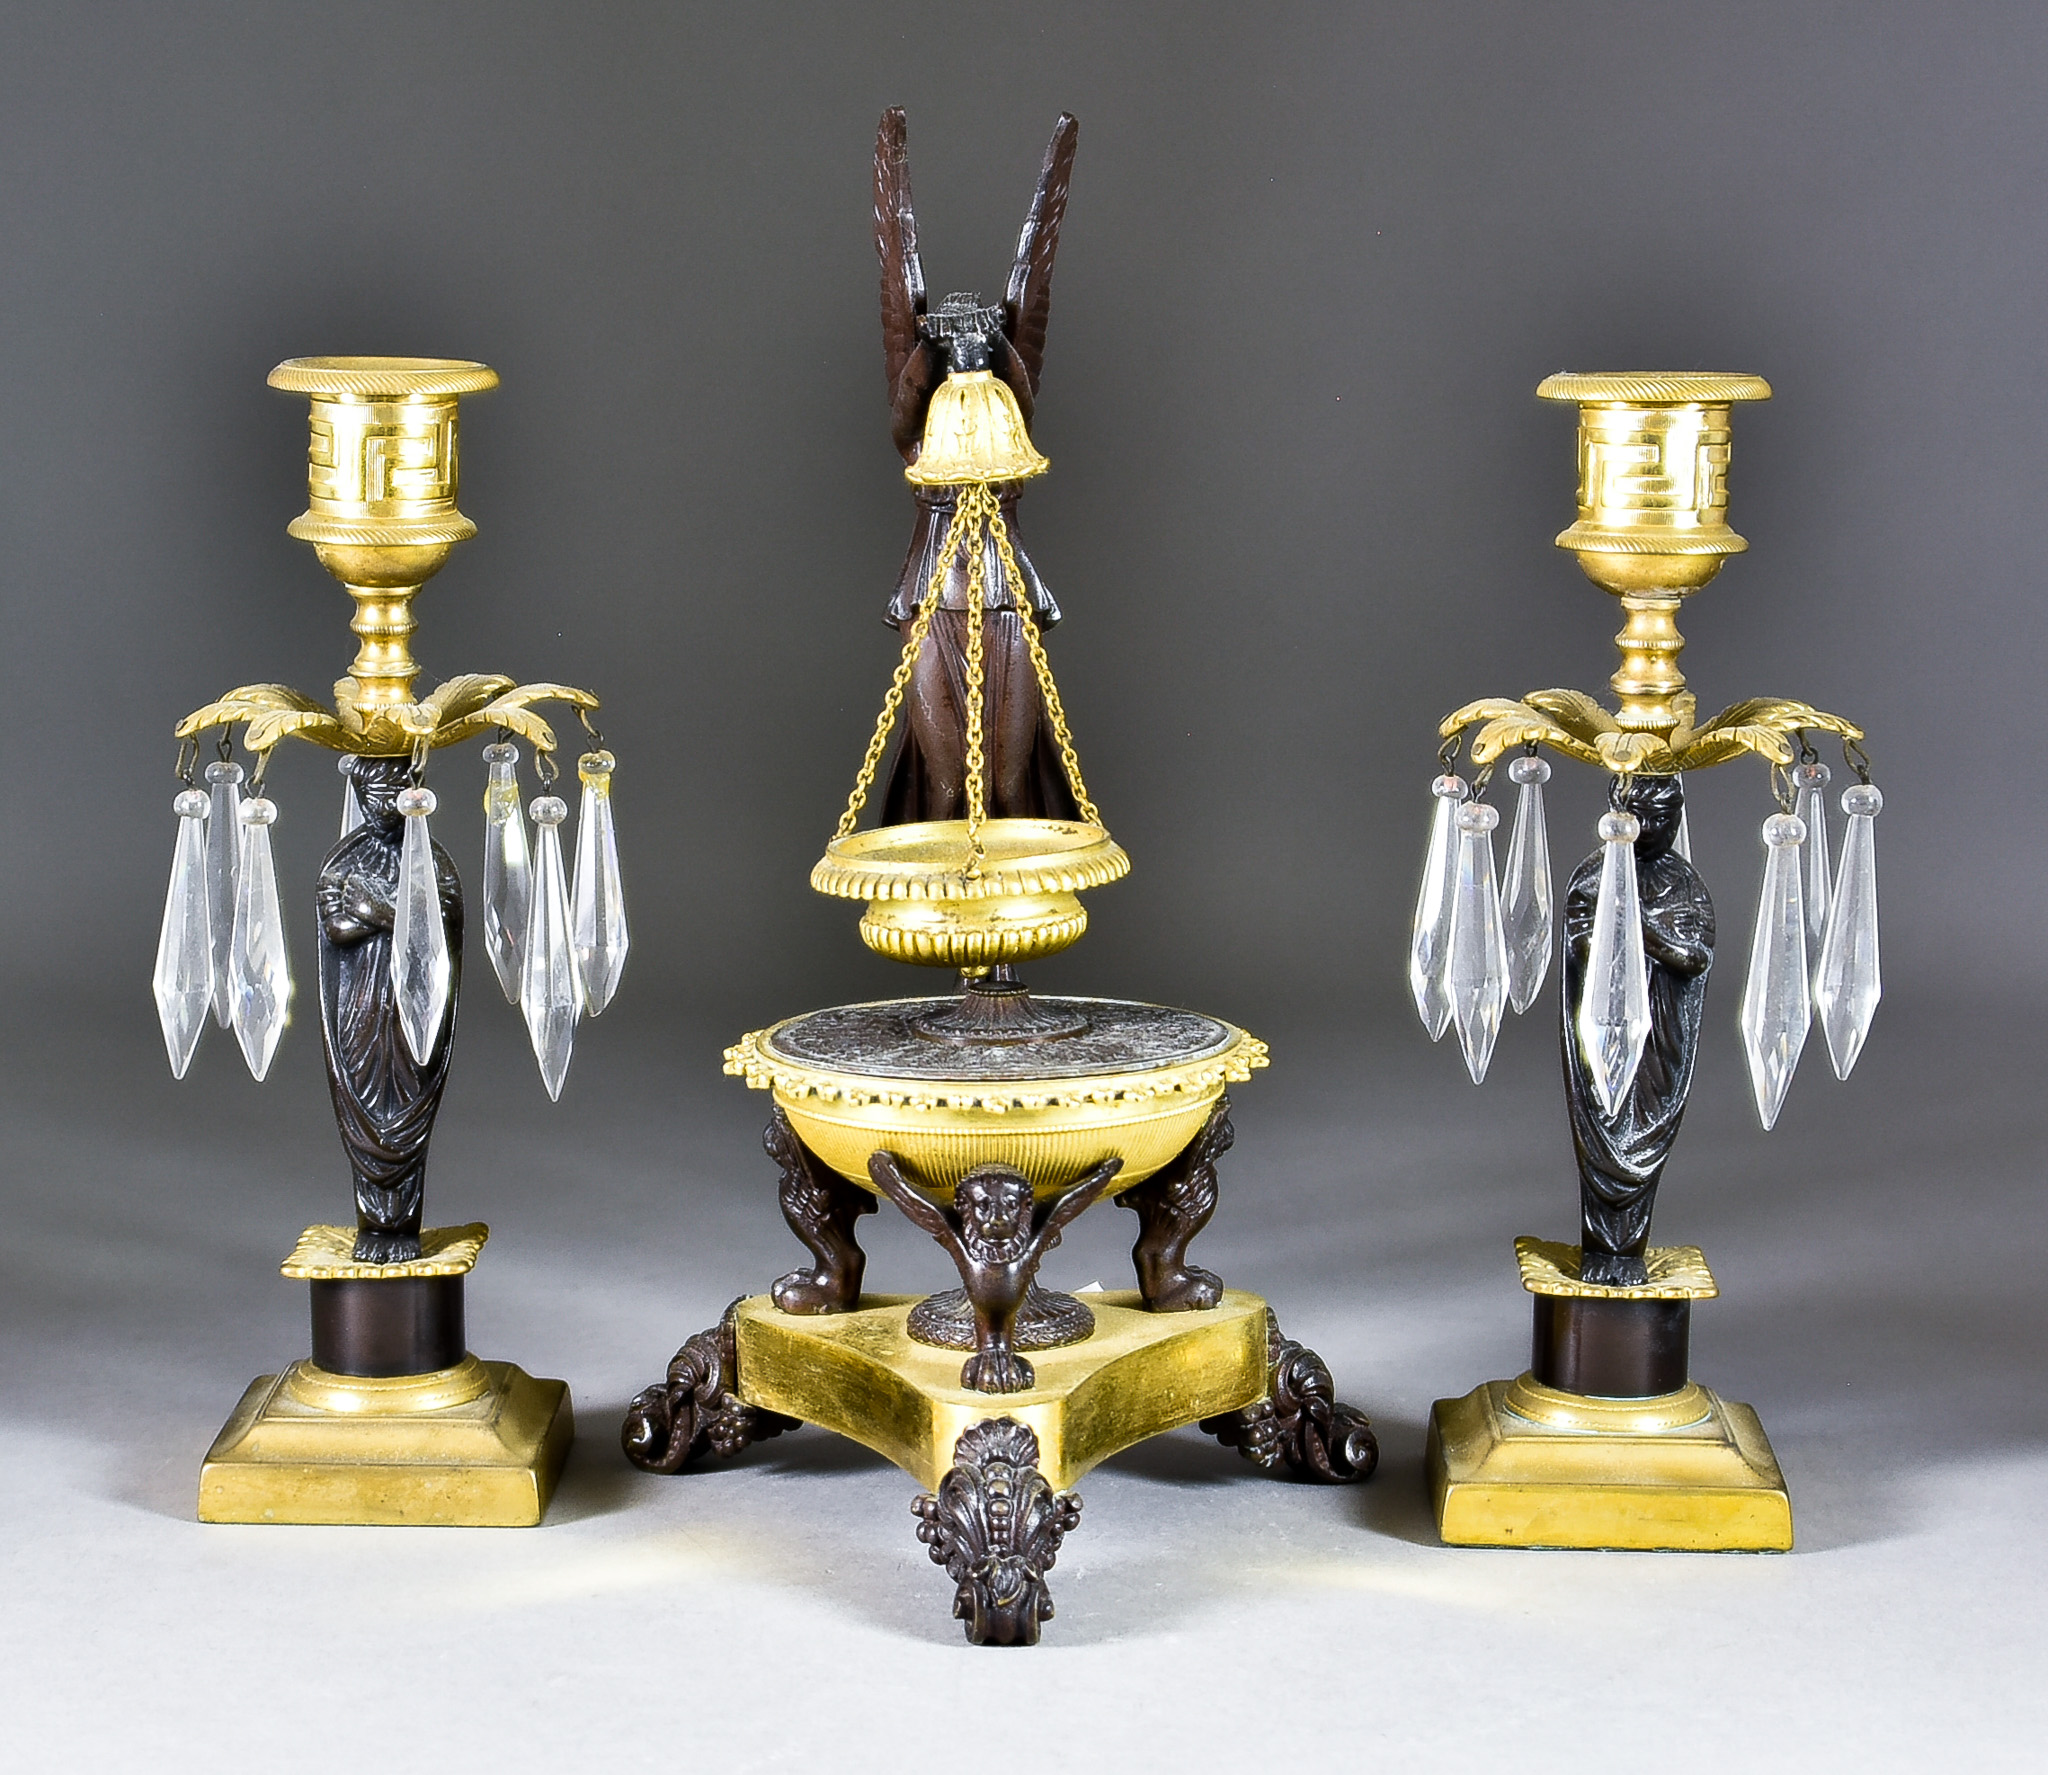 A French Bronze and Gilt Pastille Burner, 19th Century, with standing winged figure on triangular